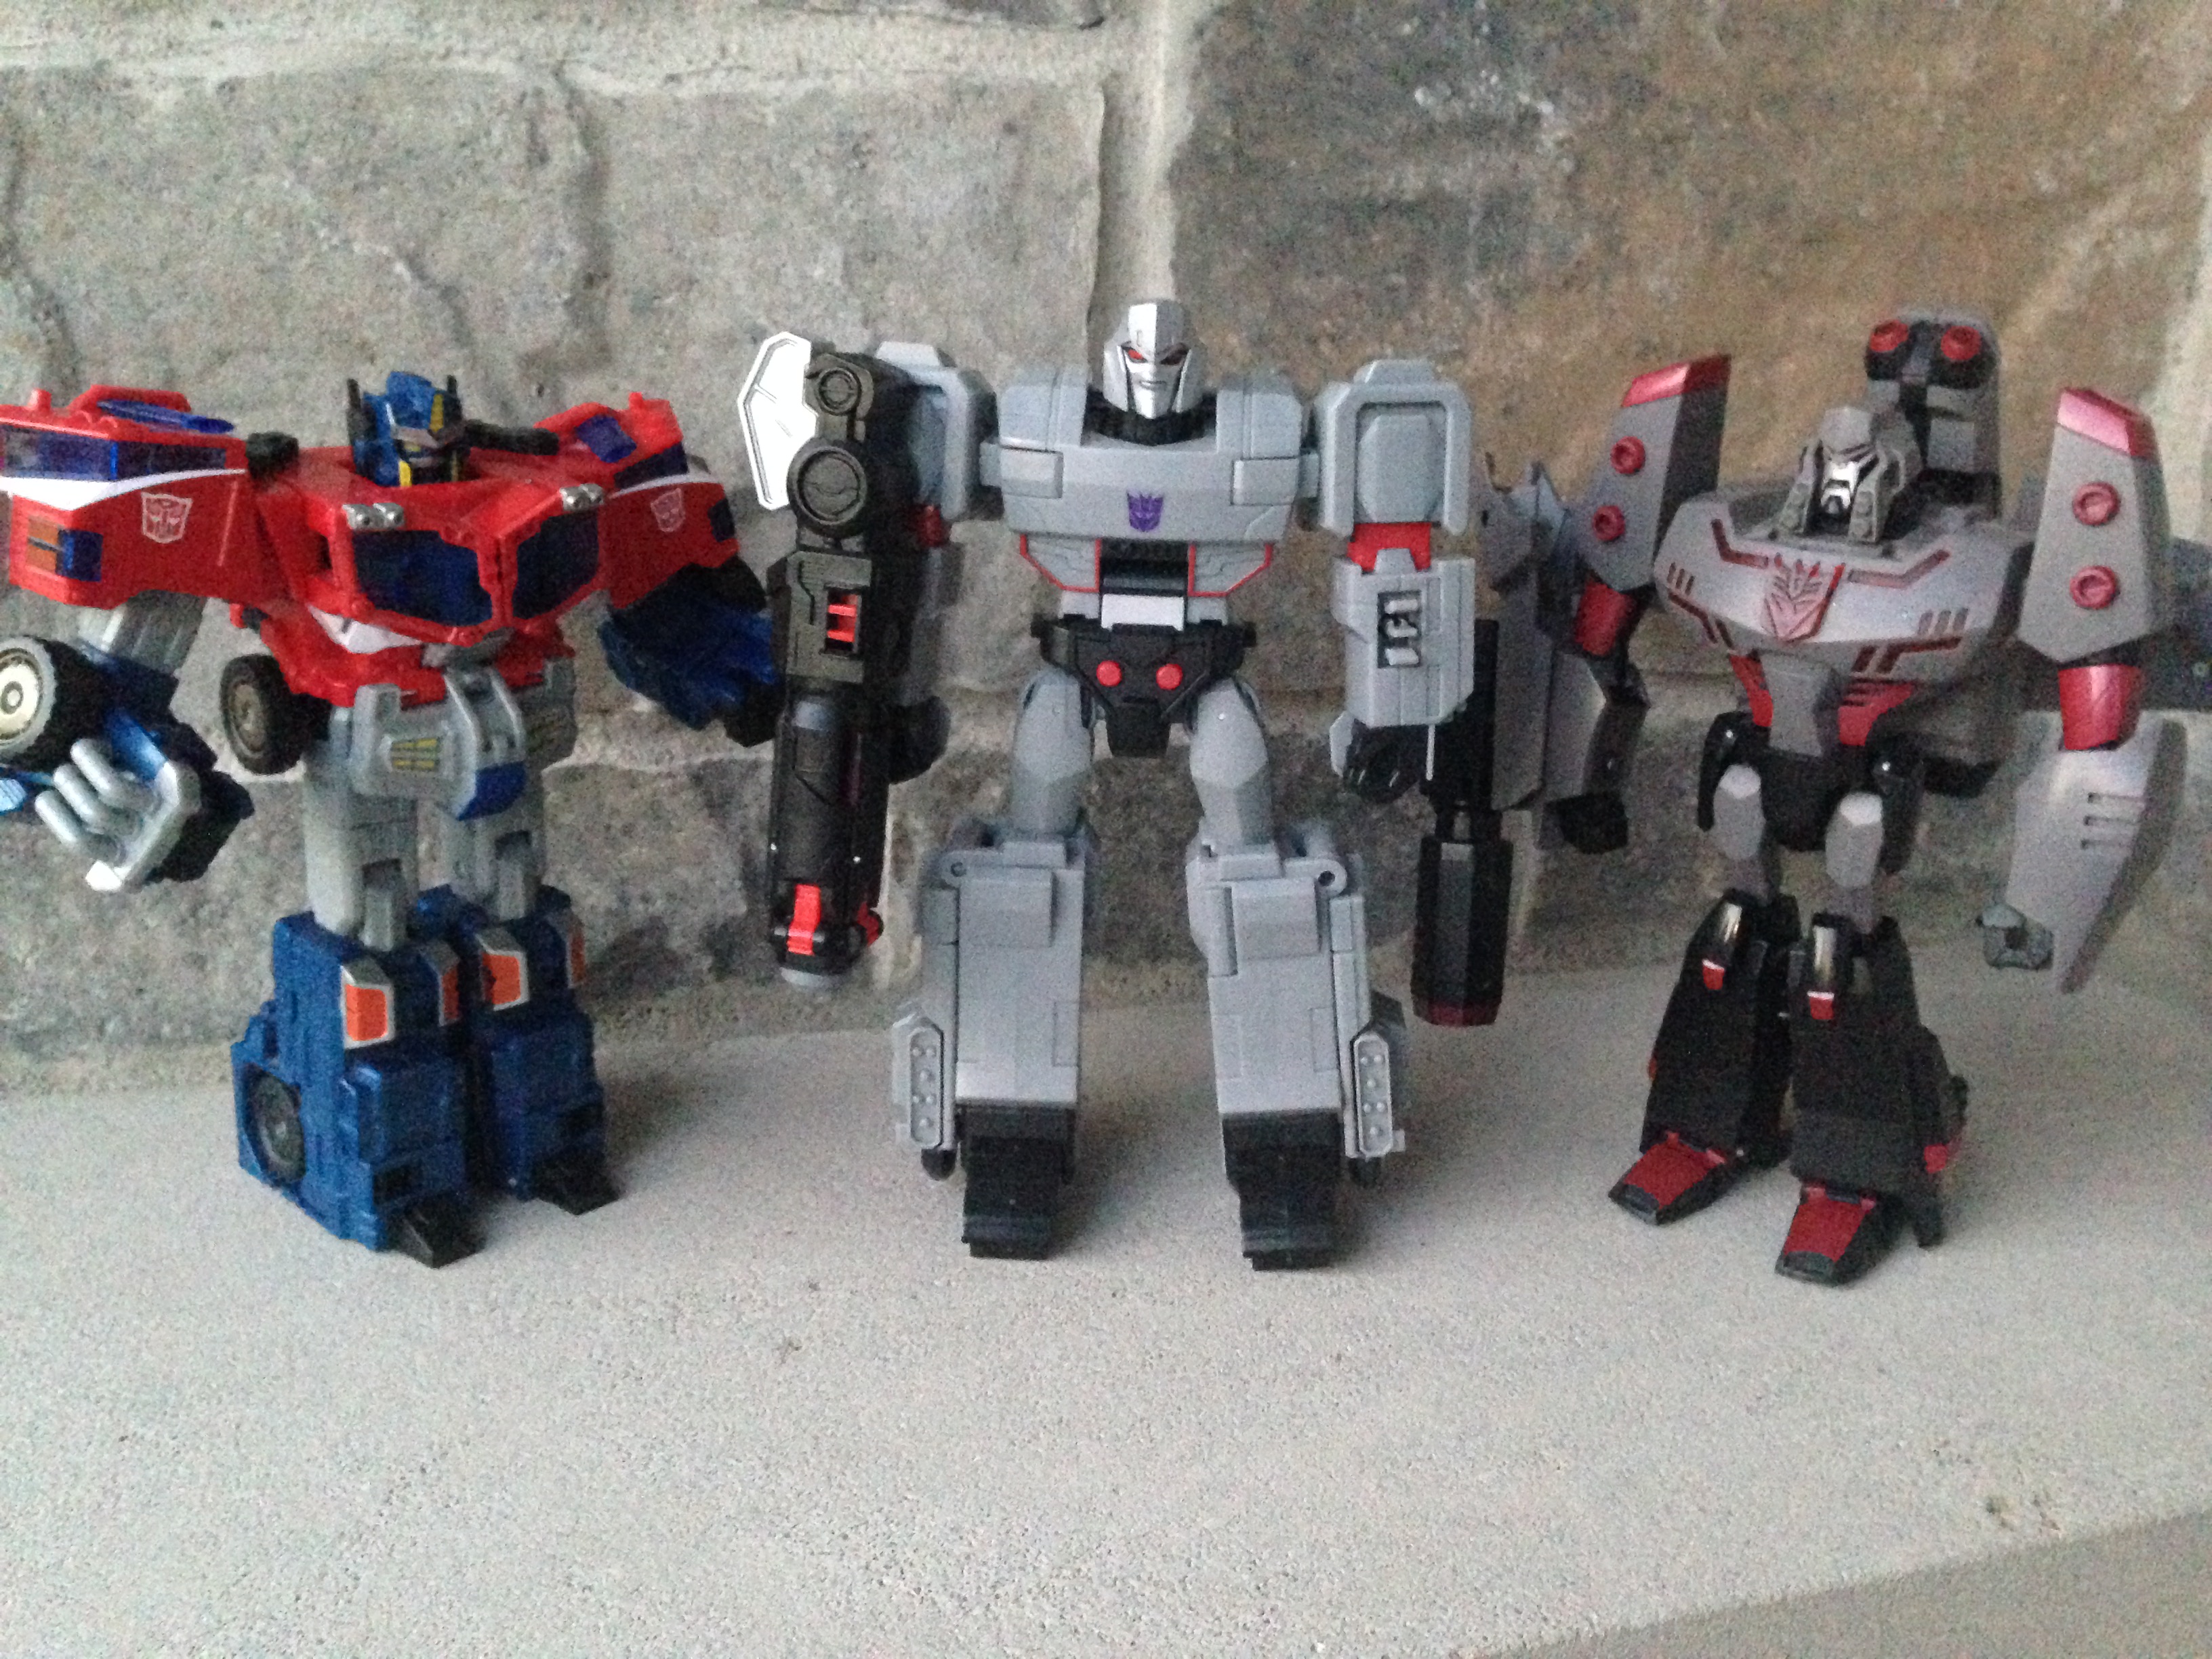 Pictorial Review for Cyberverse 